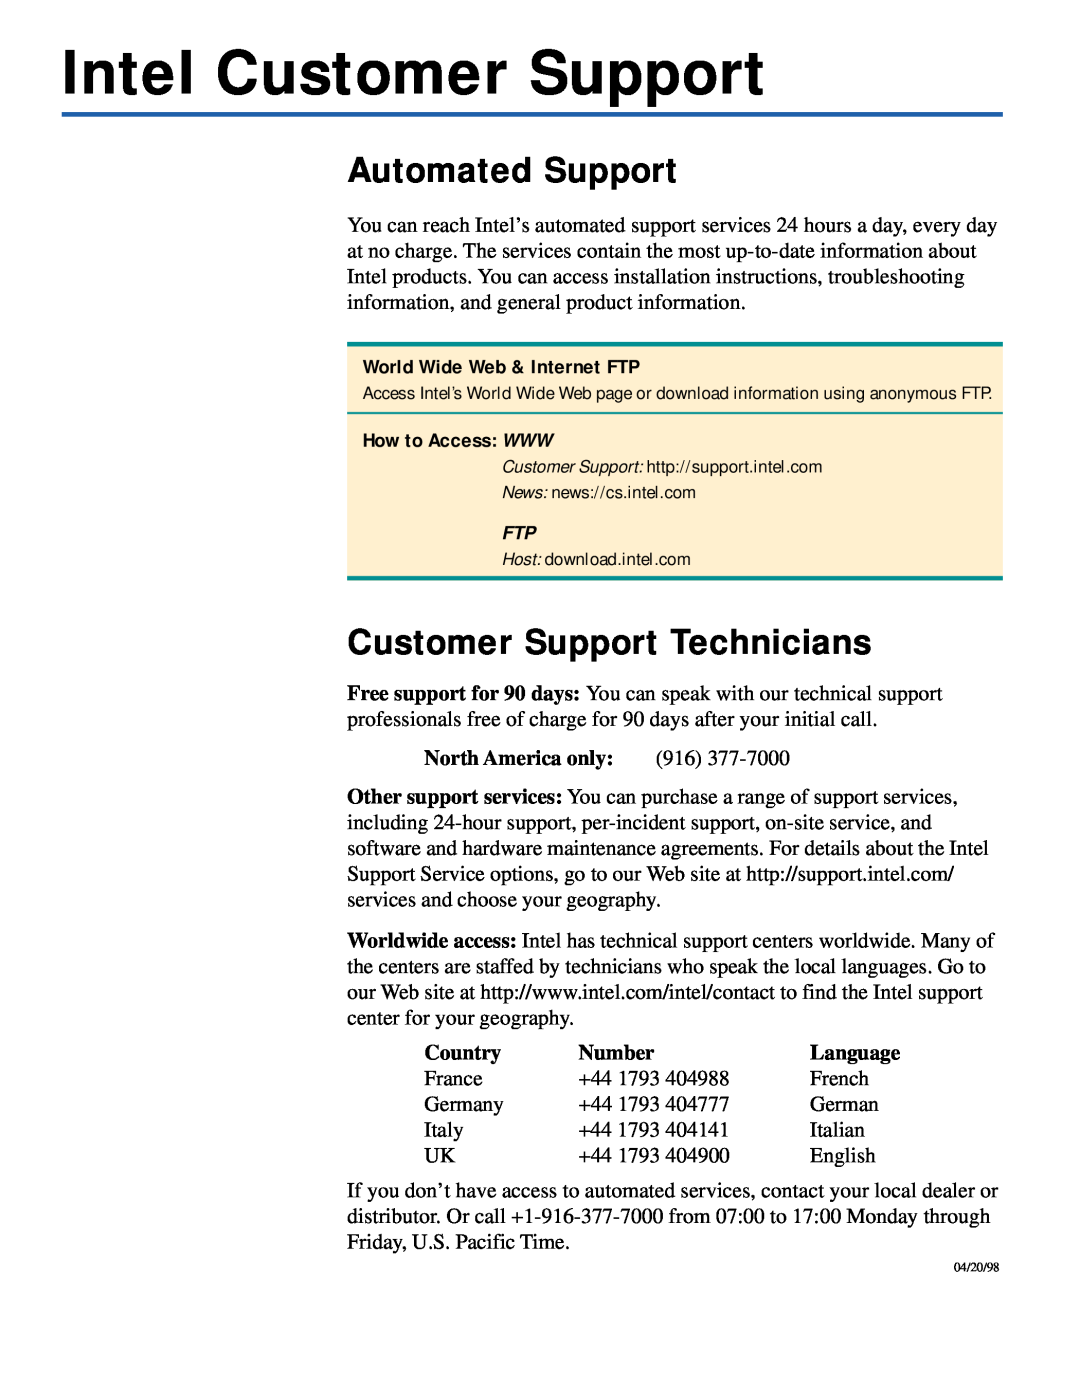 Intel 140T Intel Customer Support, Automated Support, Customer Support Technicians, World Wide Web & Internet FTP, Country 